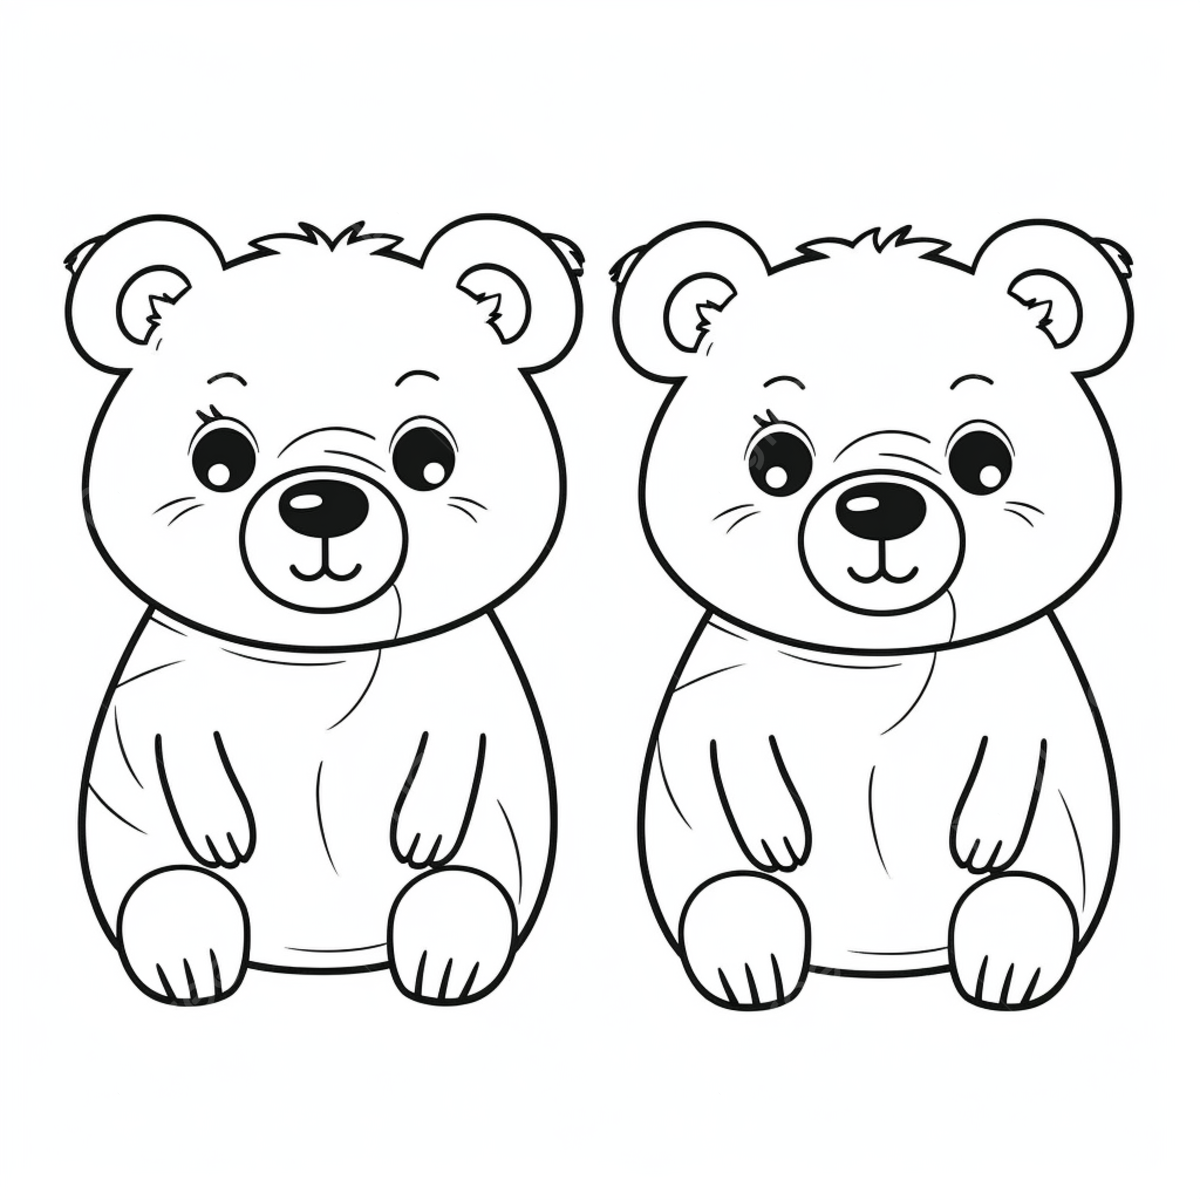 Two cute little bears coloring pages for kids basic simple cute cartoon bears outline isolated on white background children s coloring page png transparent image and clipart for free download